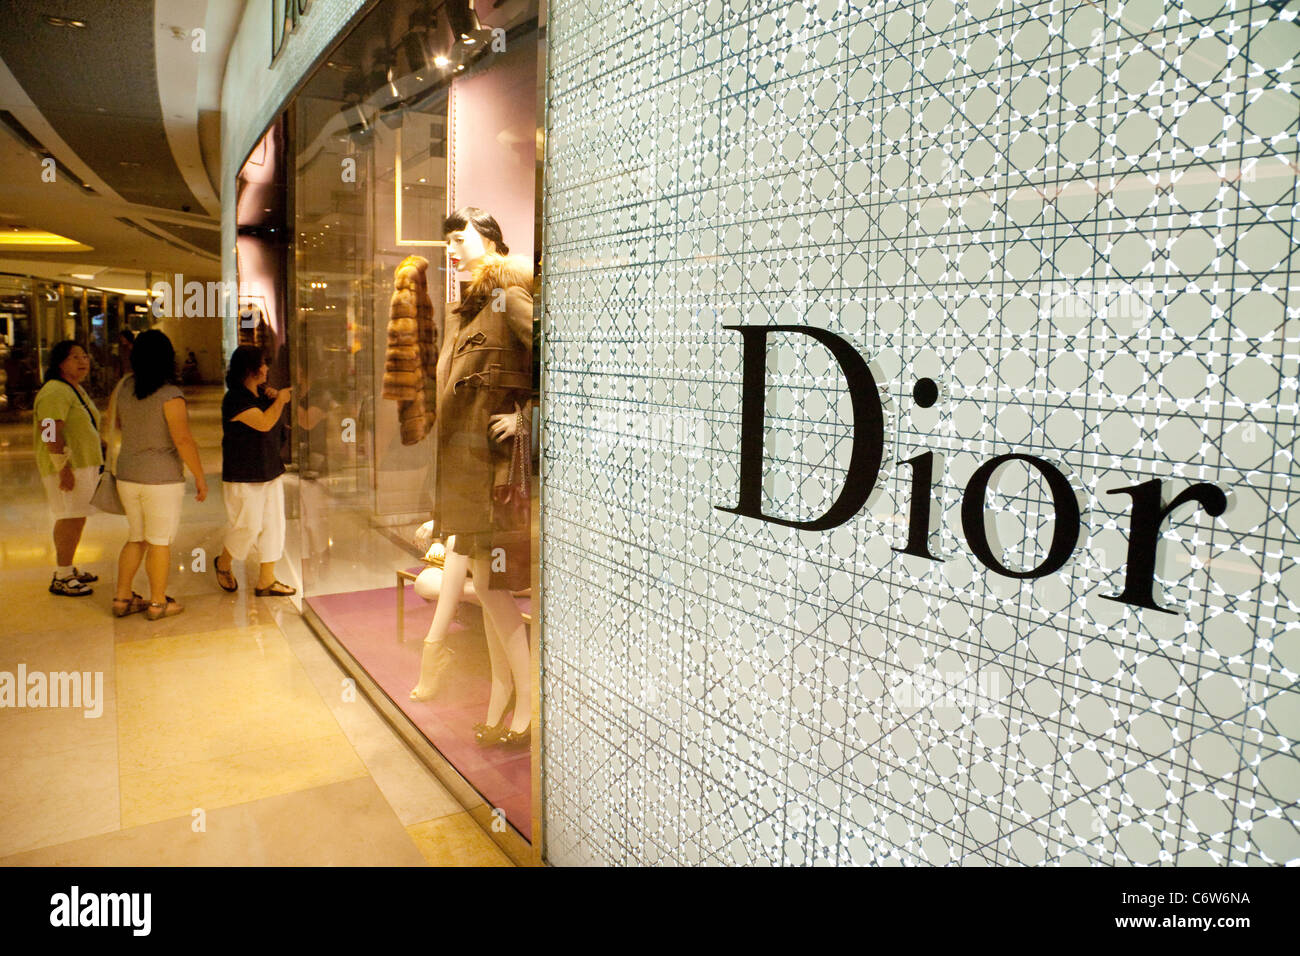 Customers at the Dior fashion store 